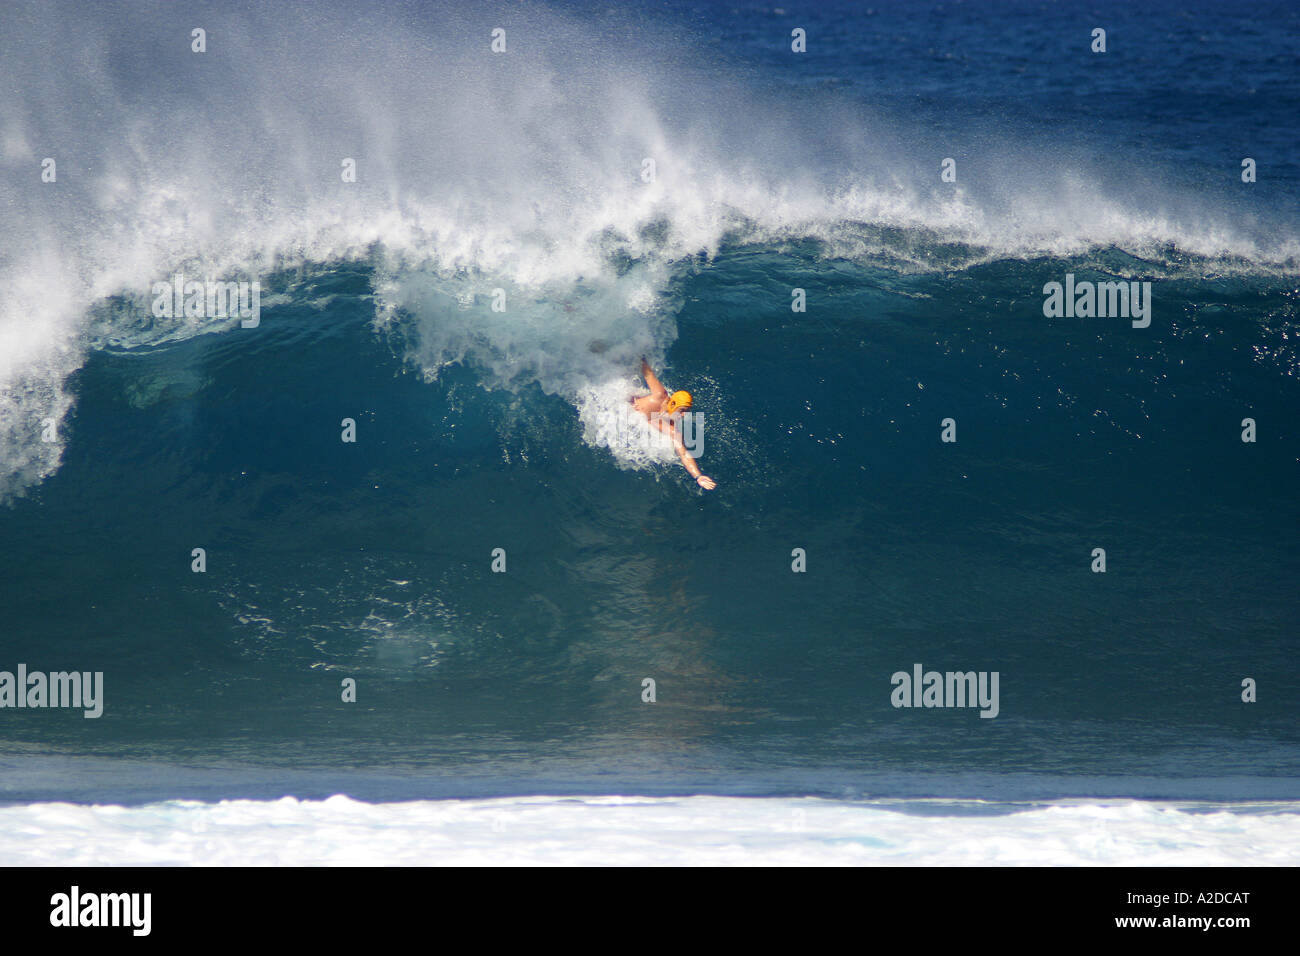 Body surfer competing in The 'Classic' at Pipeline, North Shore, Oahu, Hawaii, USA Stock Photo